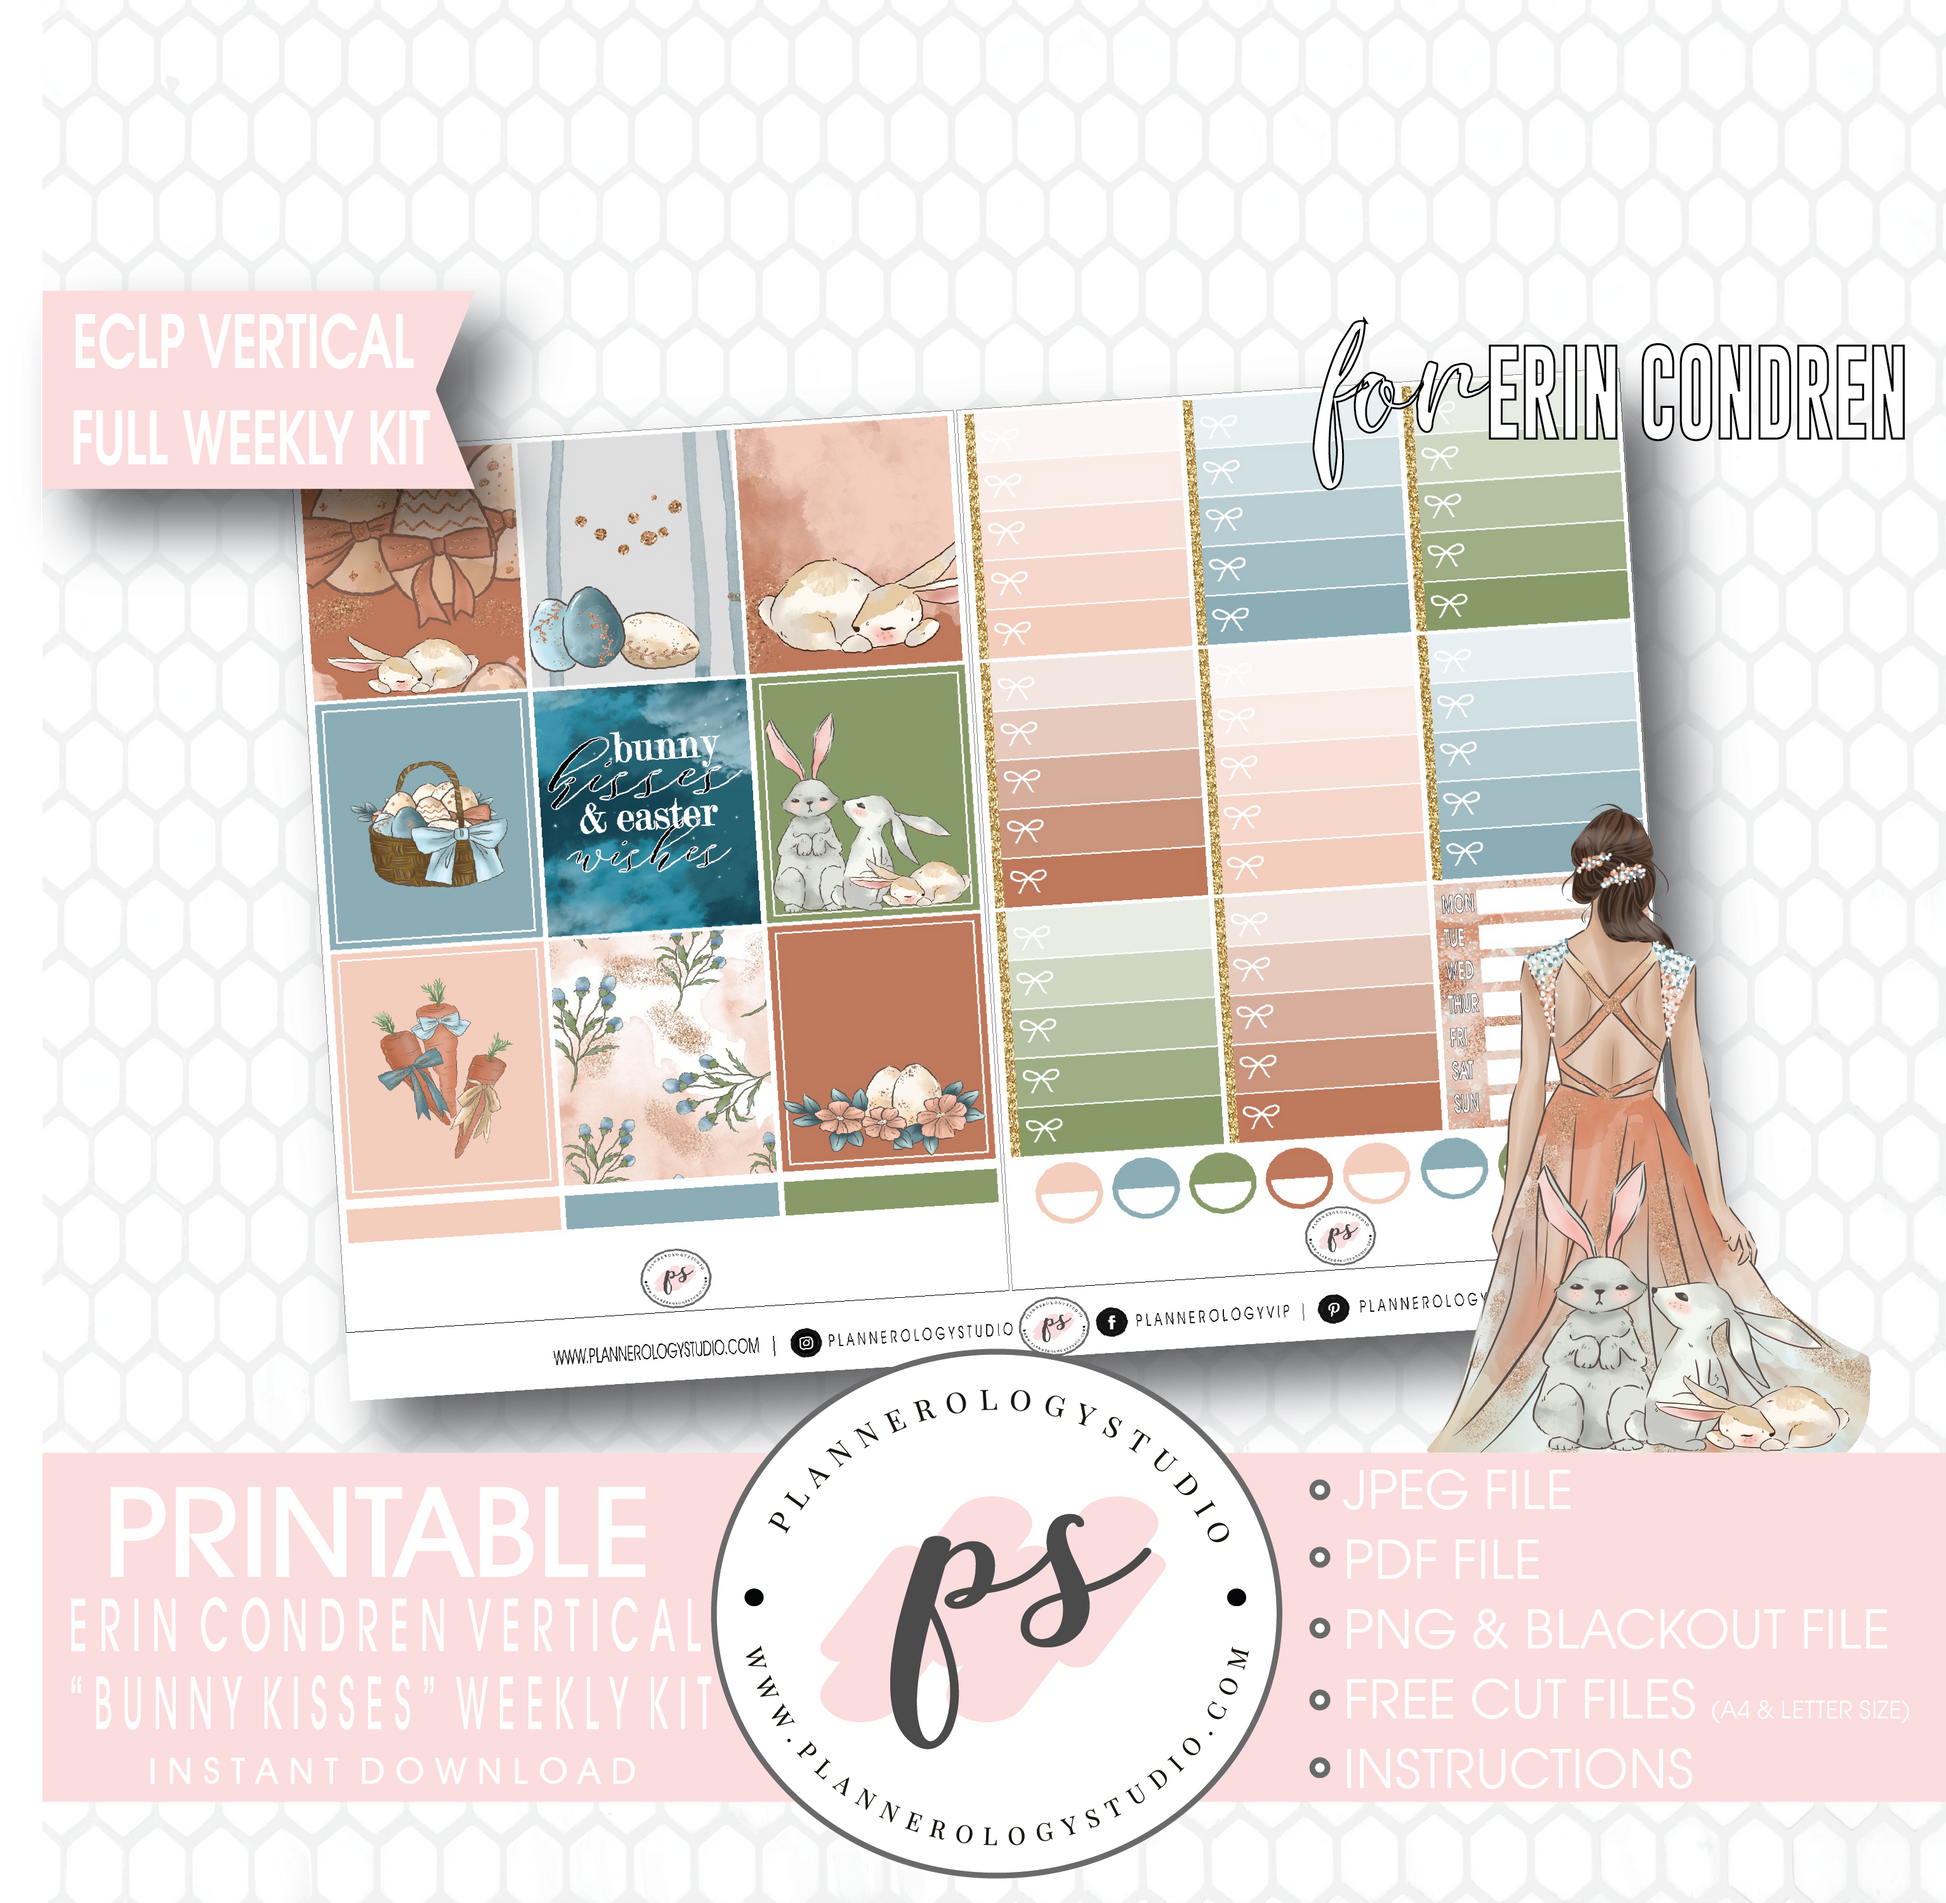 Bunny Kisses Full Weekly Kit Printable Planner Digital Stickers (for use with Erin Condren Vertical - Plannerologystudio